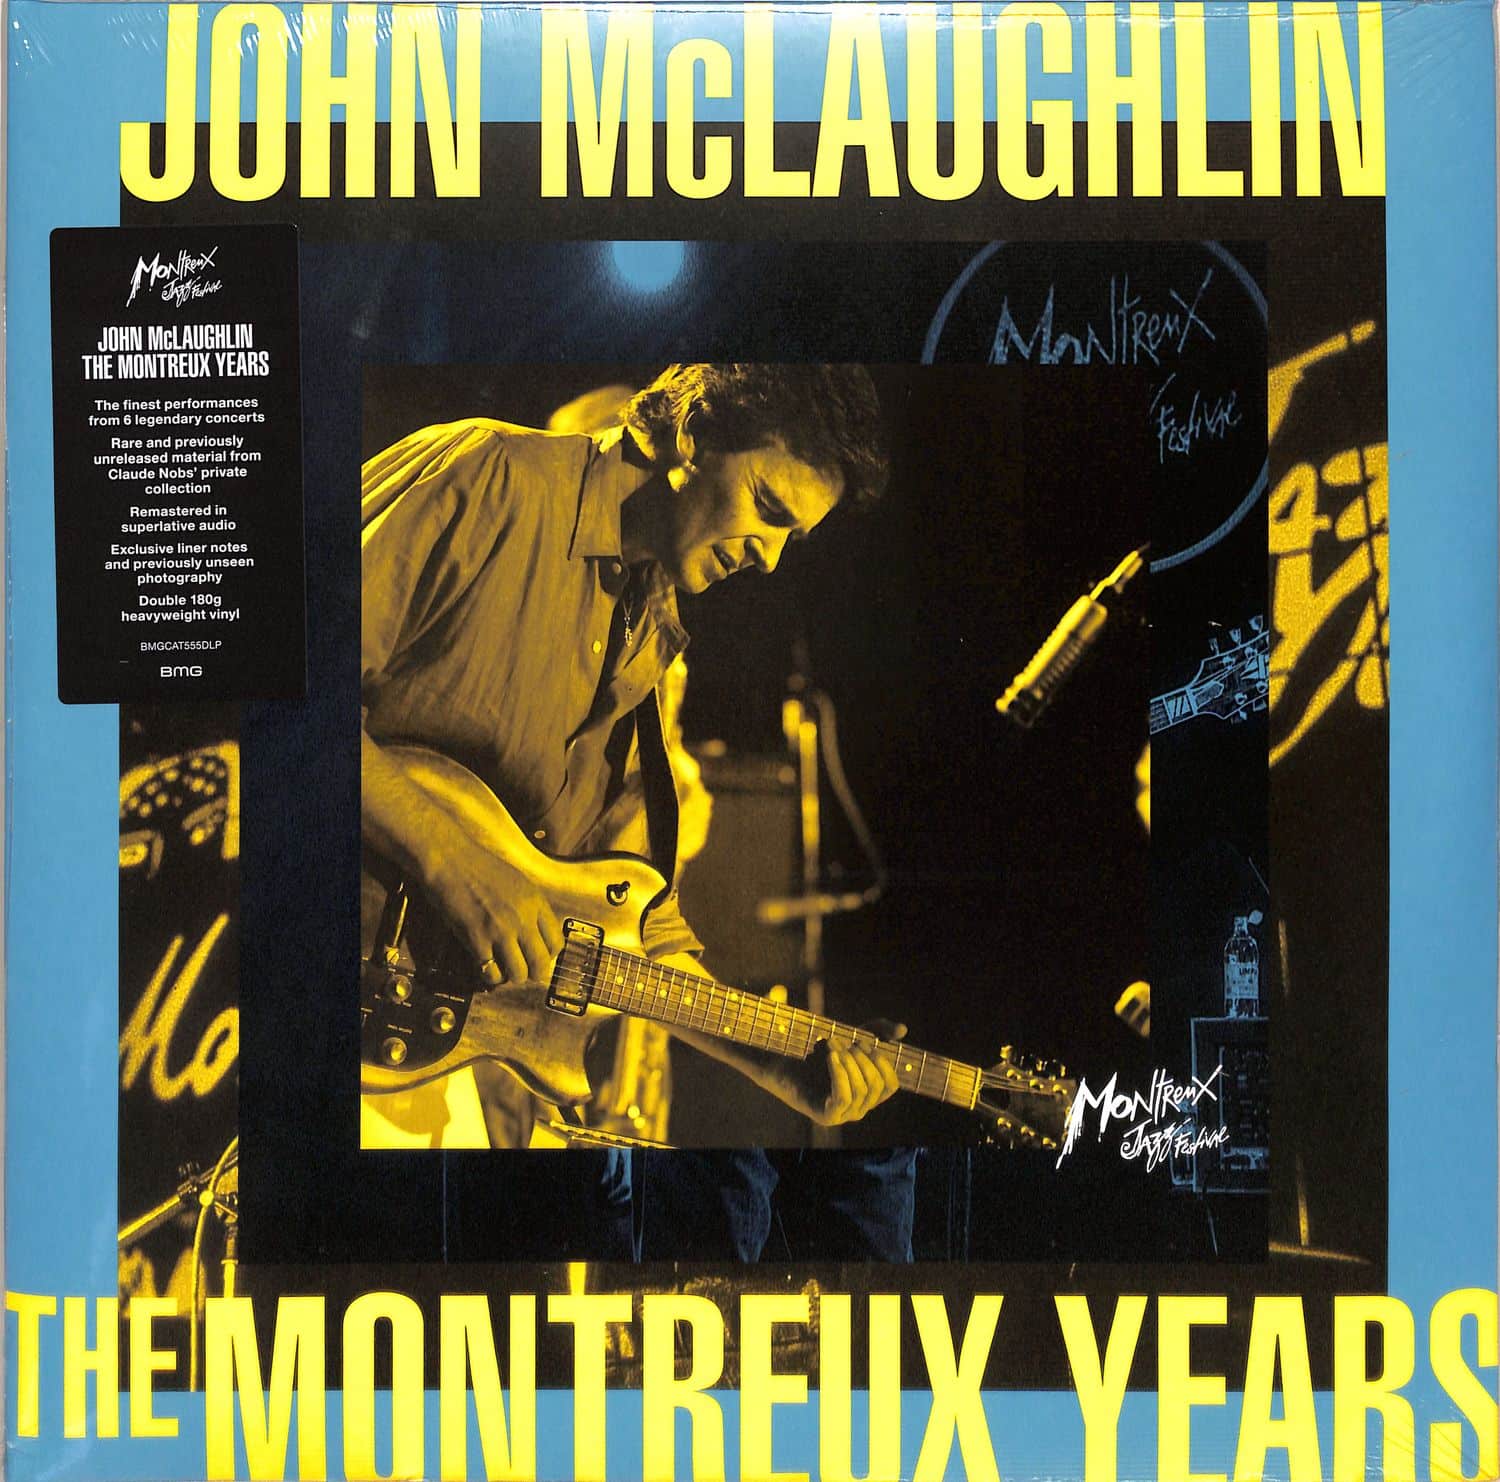 John McLaughlin - THE MONTREUX YEARS 